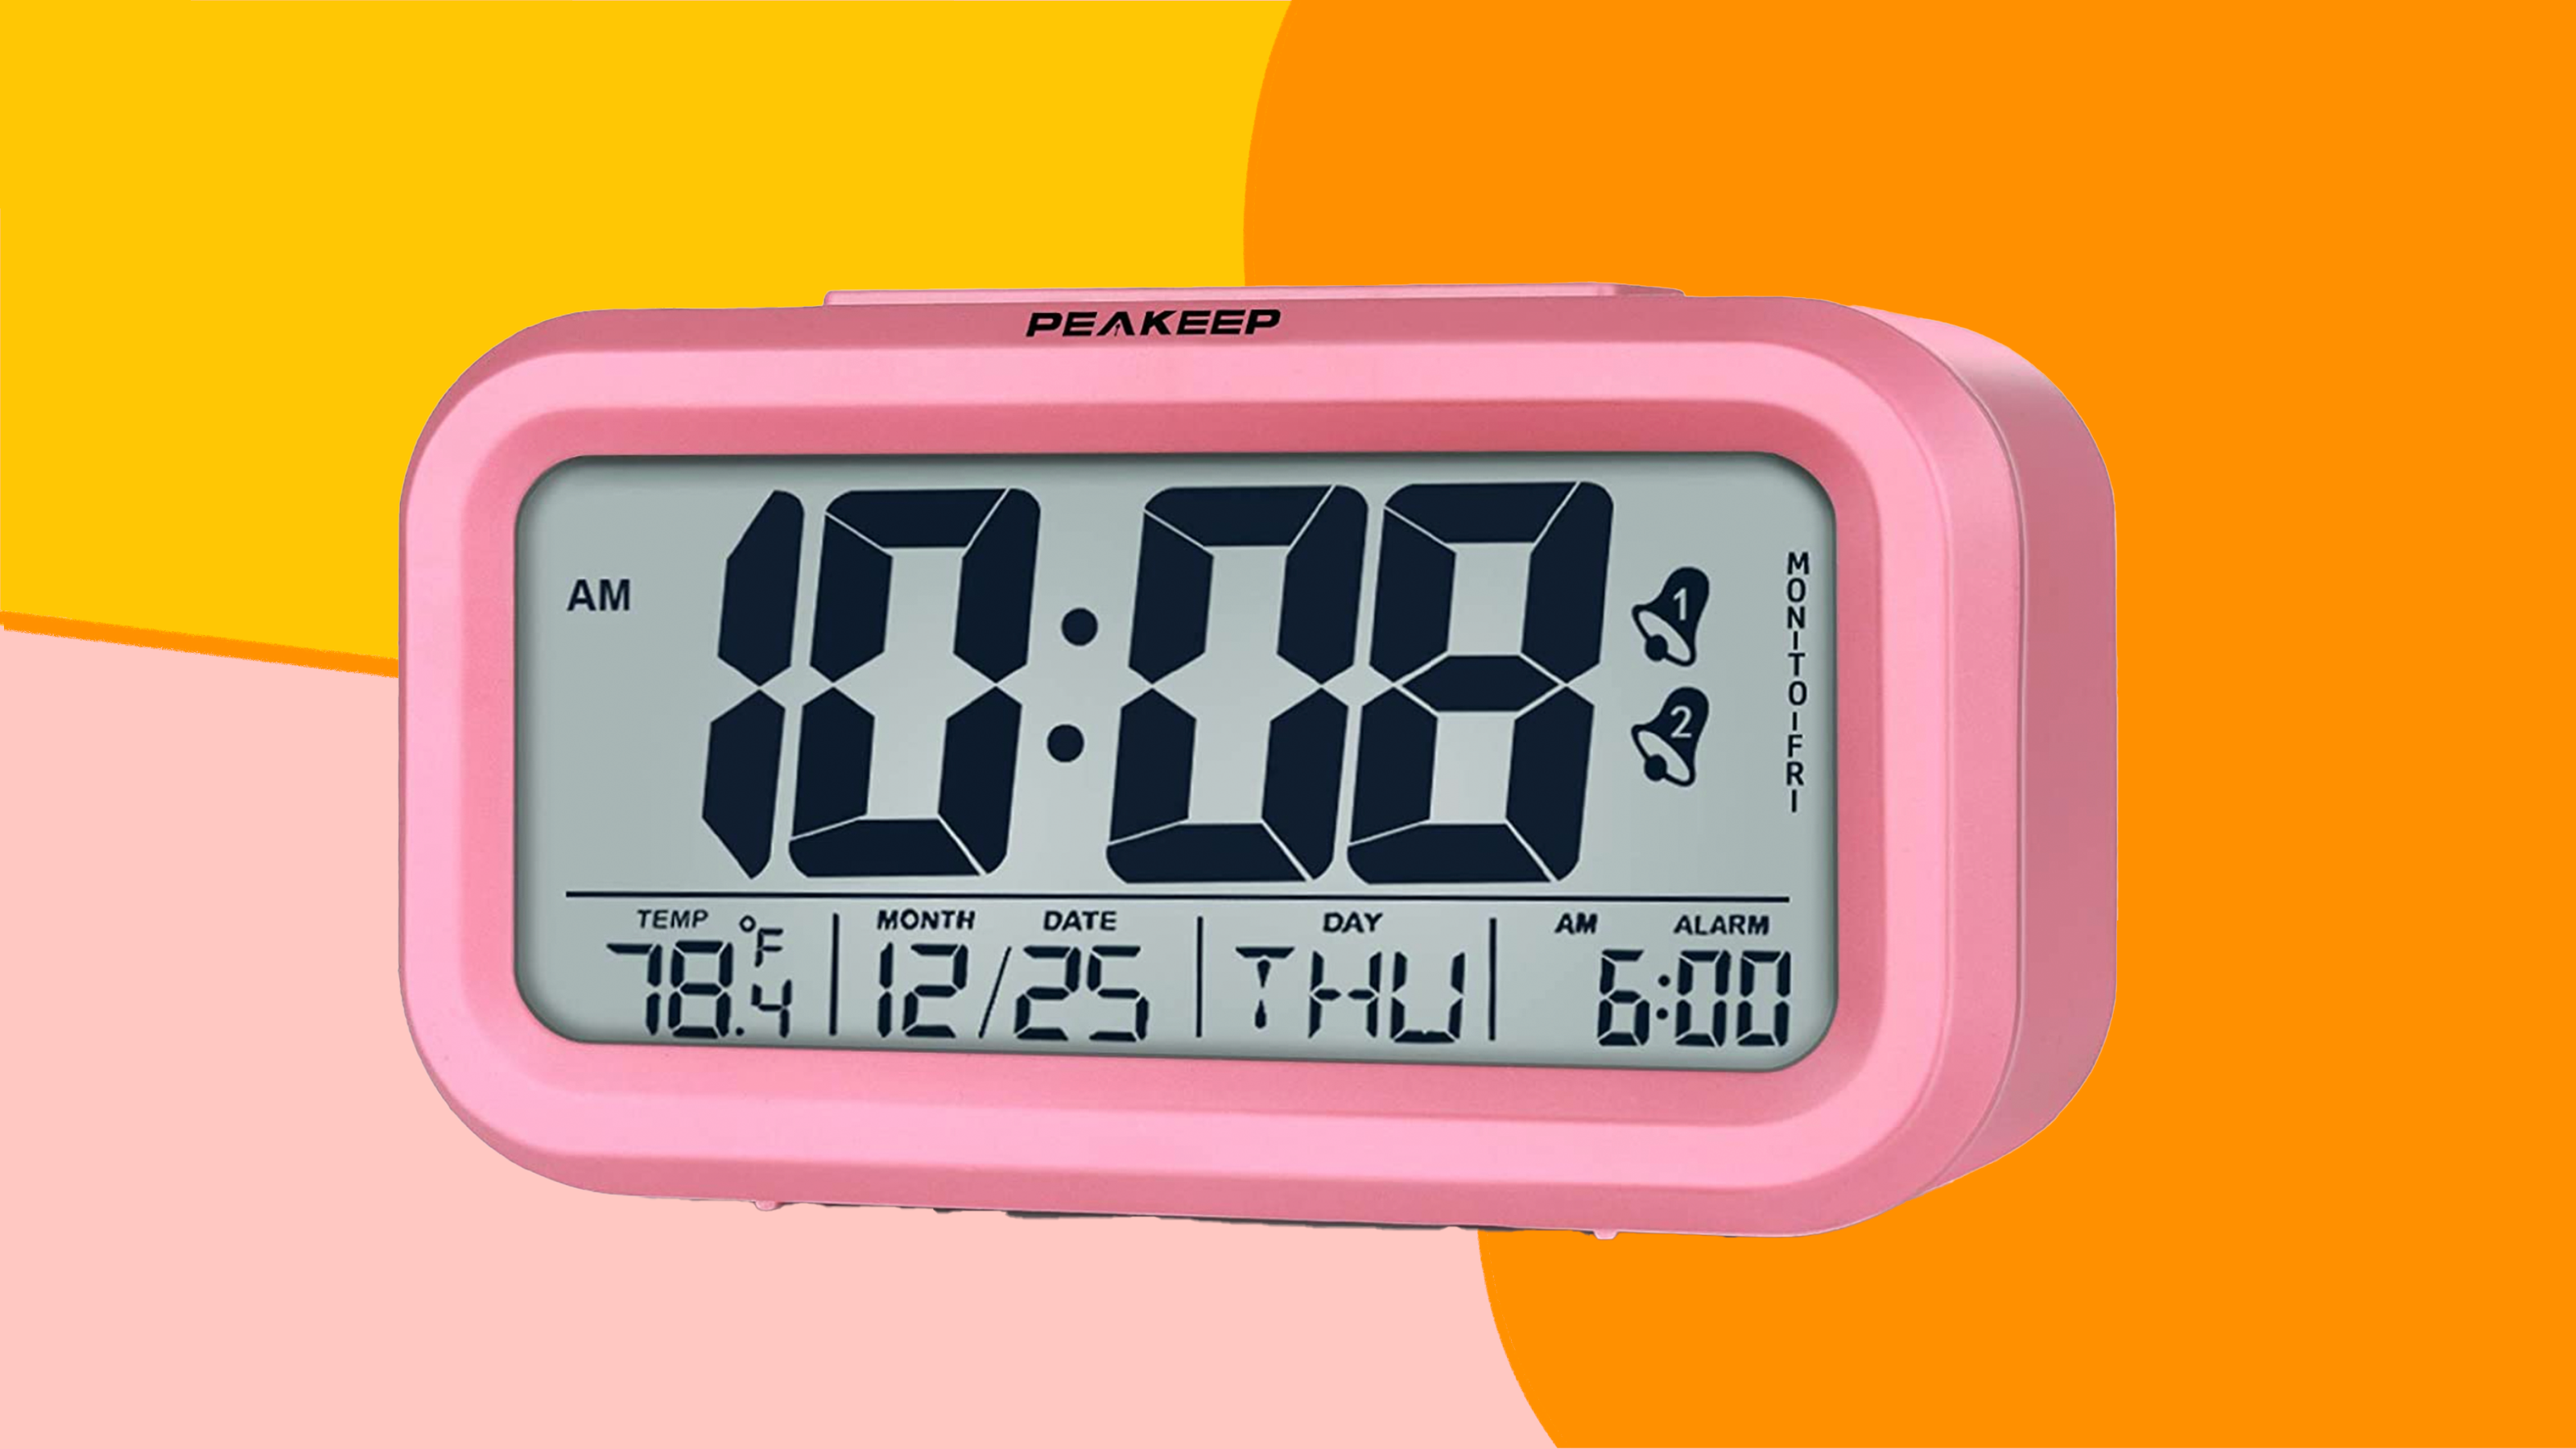 Indoor Temperature Display for Kids Children Alarm Clock Digital Wake Up Light Clock with 7 Colors Changing One Tap Control,Smart Snooze Students,Heavy Sleepers Etc Kids Clocks Working Parents 